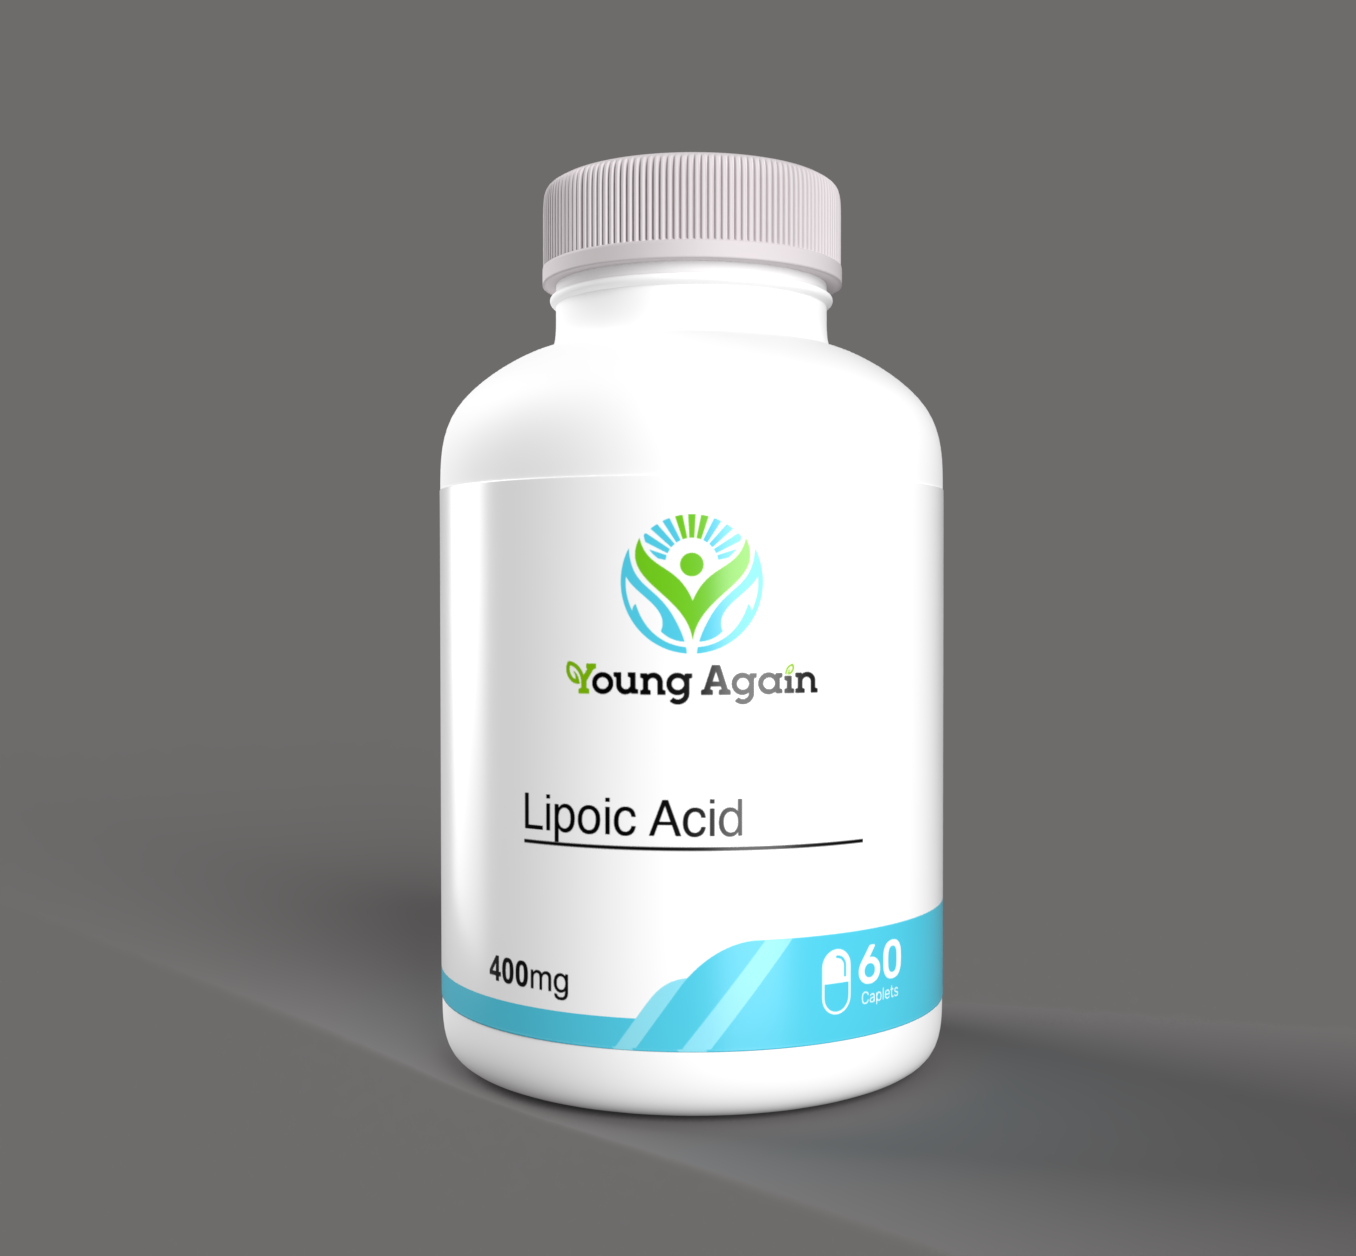 Lipoic Acid product from Young Again